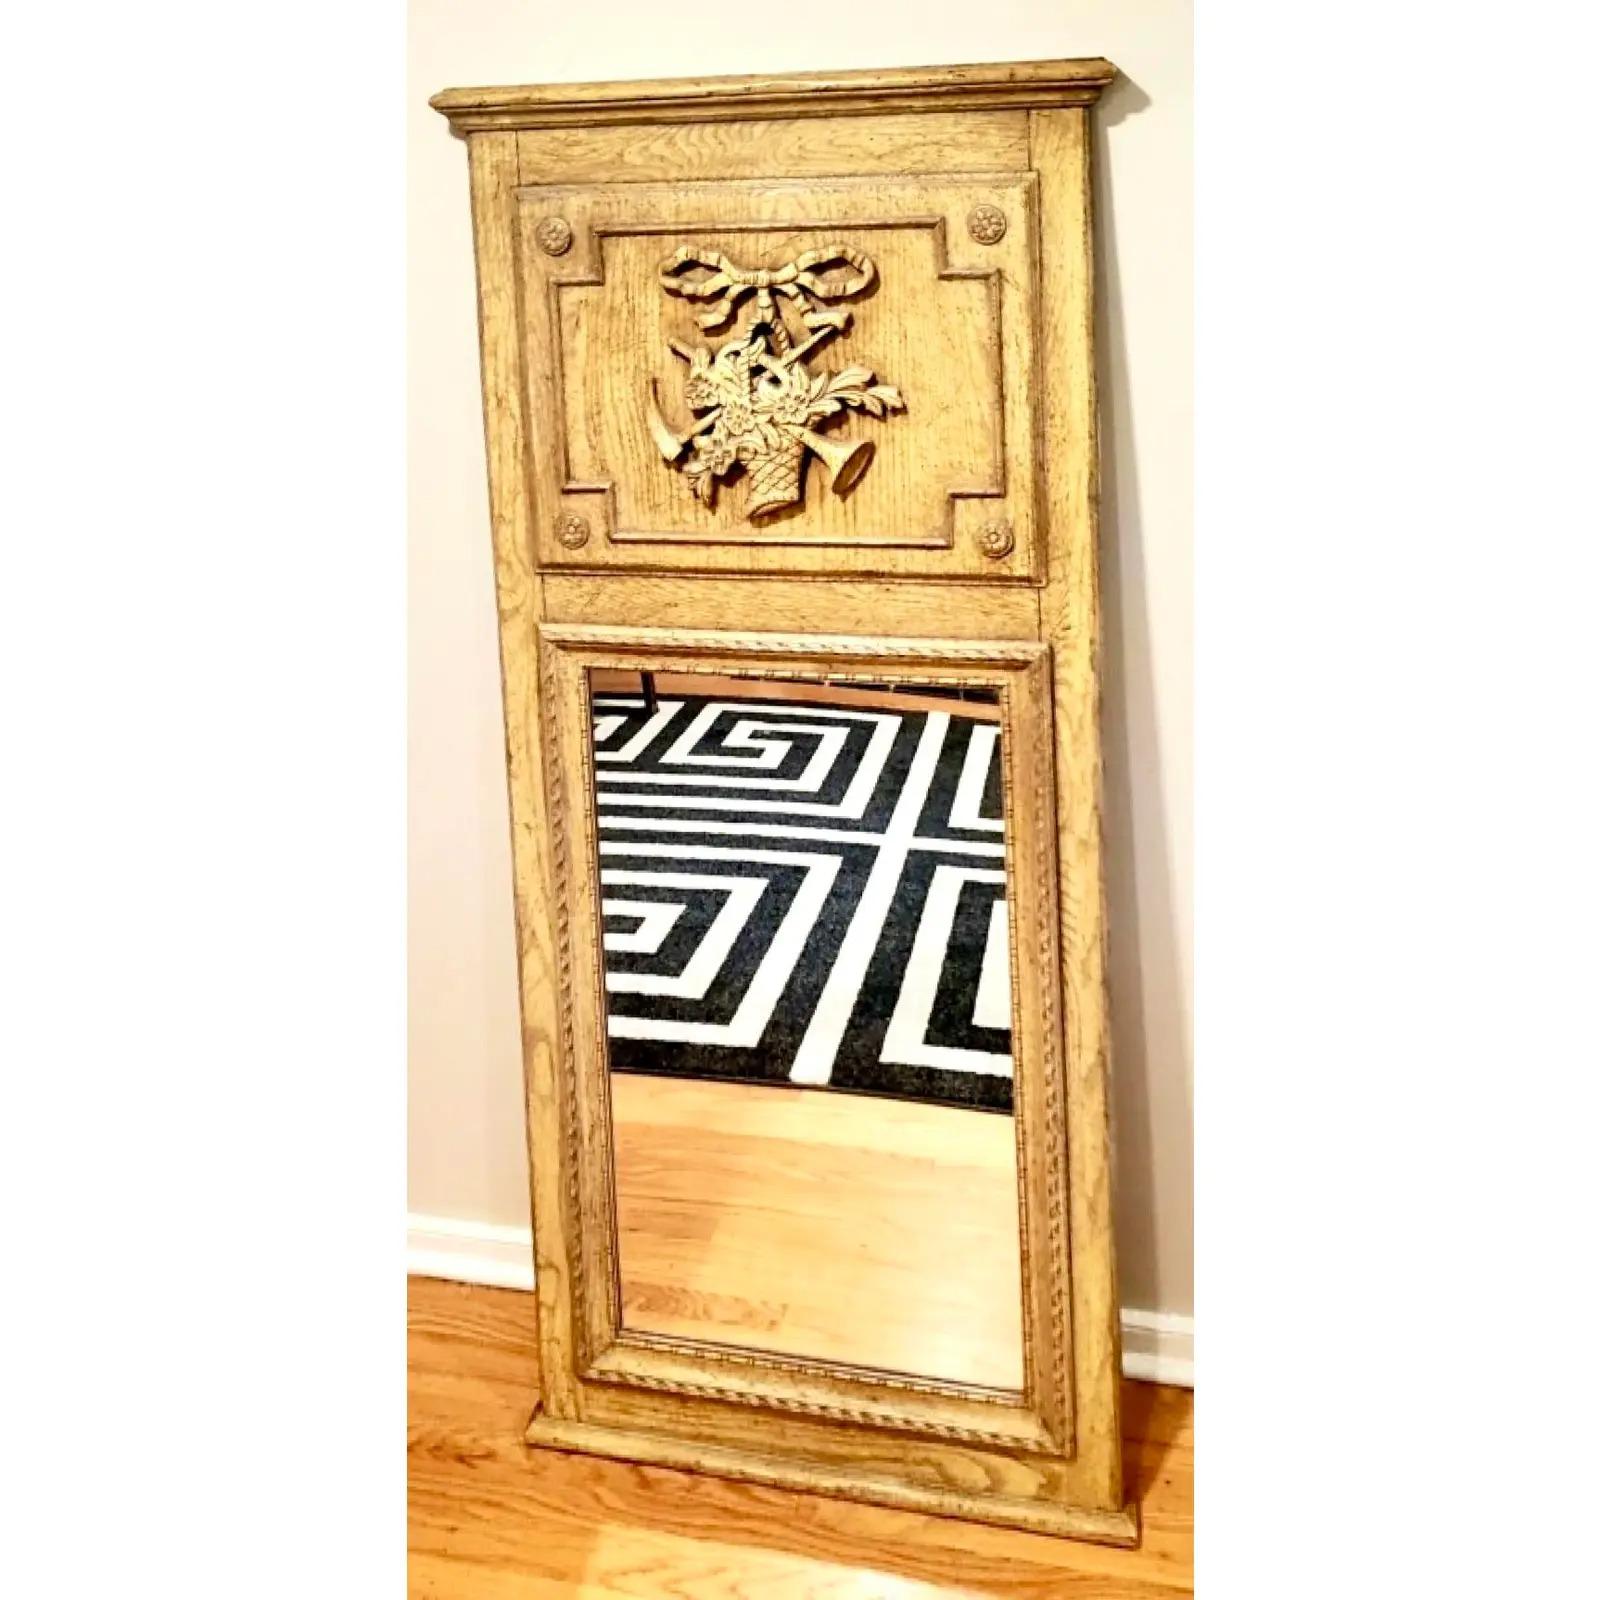 Fantastic vintage Antiqued Trumeau mirror. Made by the iconic Baker Furniture company. Beautiful hand carved detail. Acquired from a Palm Beach estate.